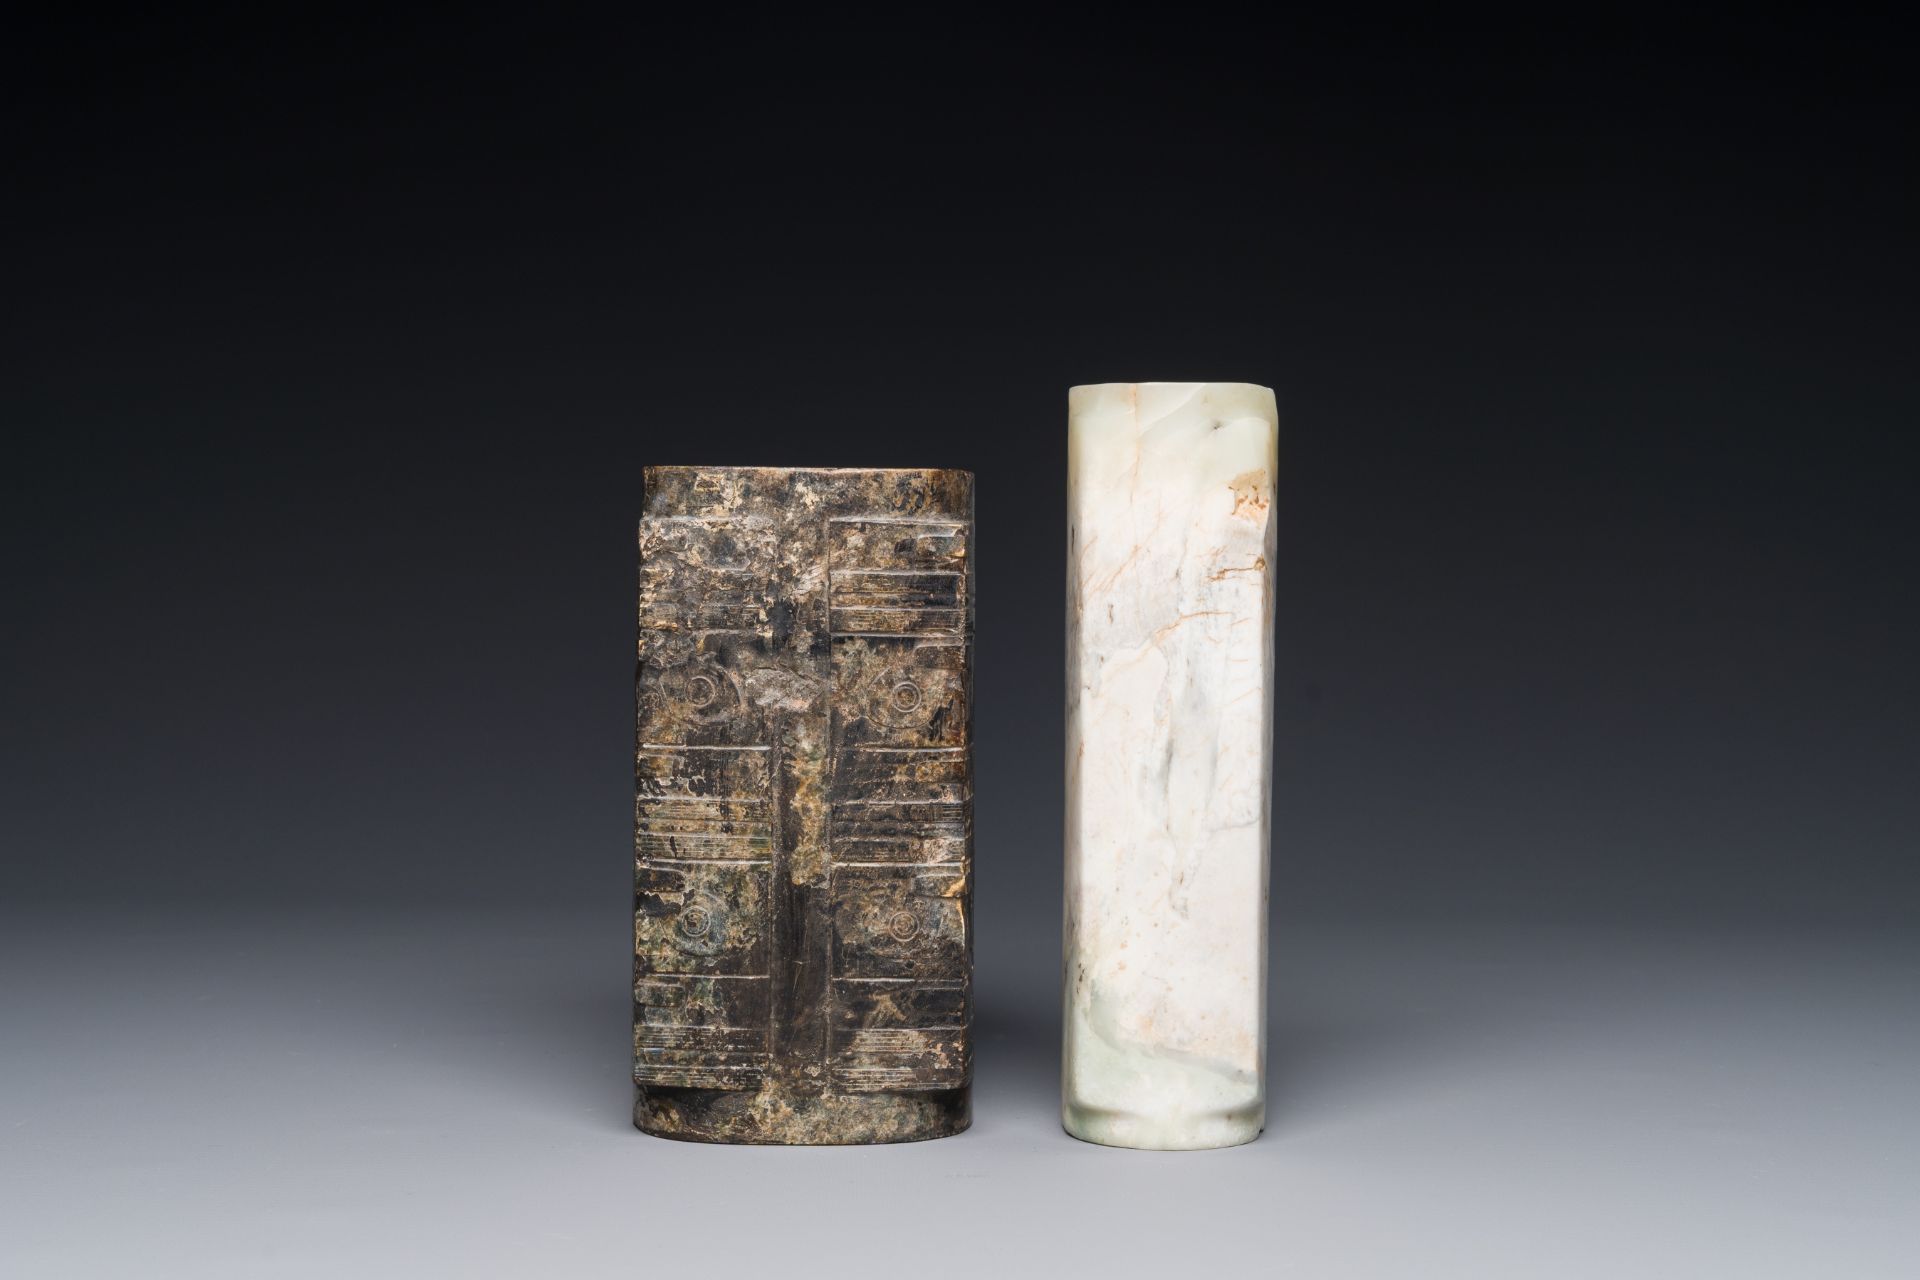 Two Chinese jade ritual 'cong' vases, 2/4th C. B.C. - Image 4 of 5